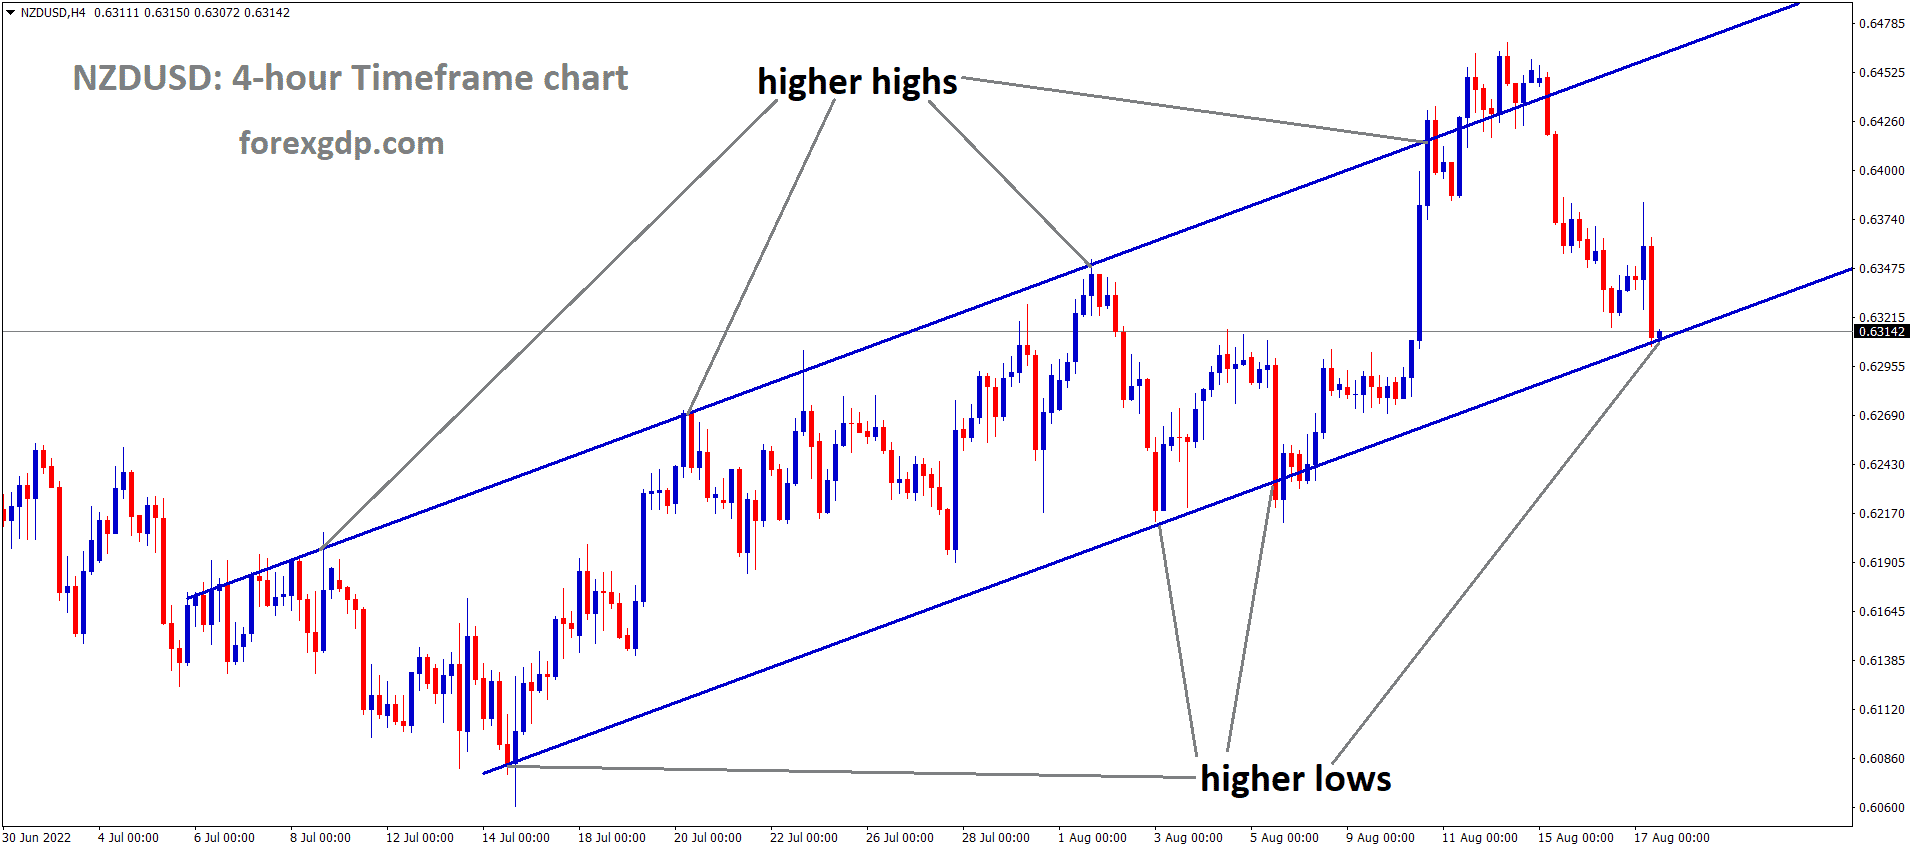 NZDUSD is moving in an Ascending channel and the Market has reached the higher low area of the channel